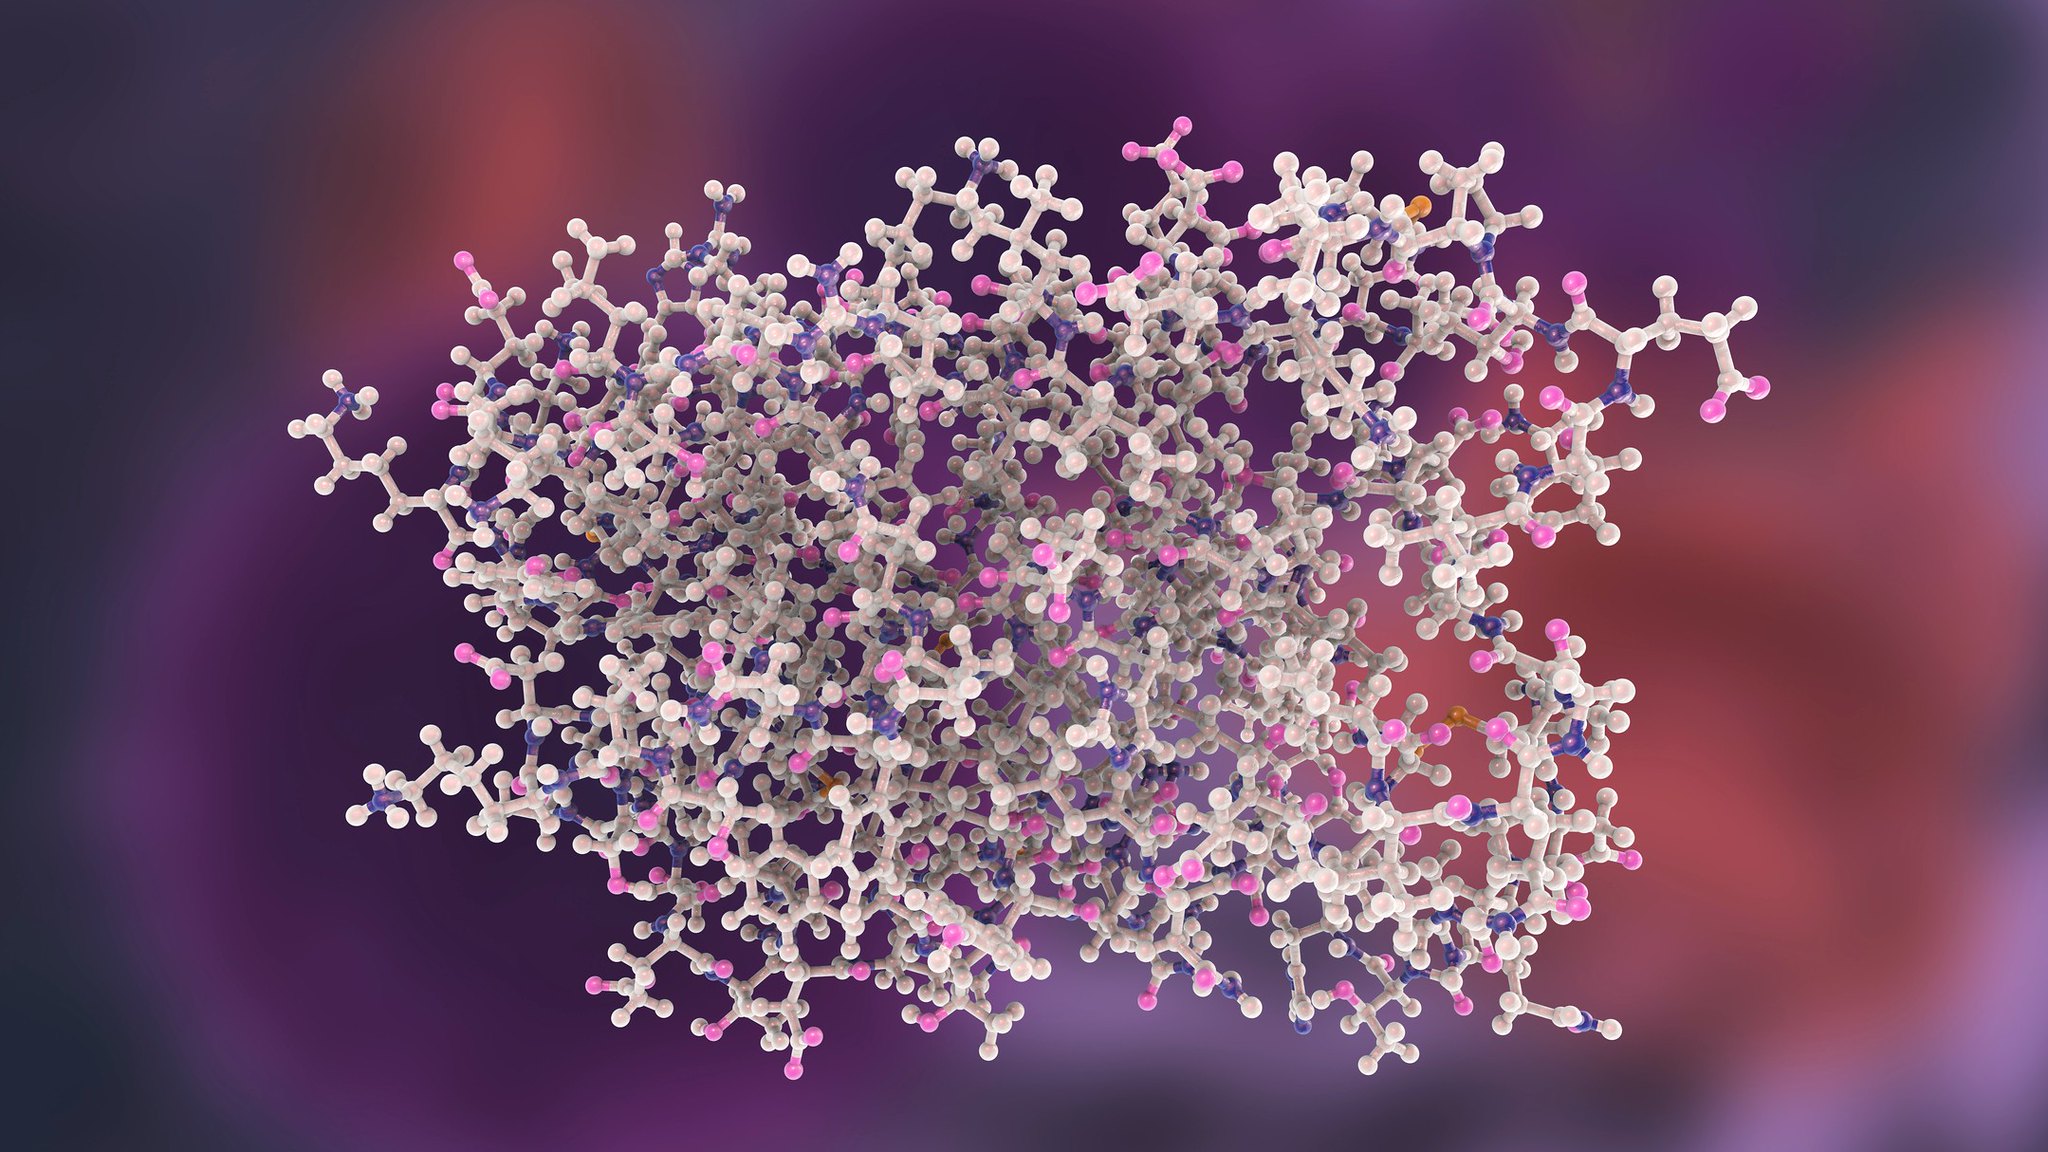 Molecular model of interferon-alpha, 3D illustration. IFN-alpha is a protein produced by leukocytes and involved in innate immune response against viral infections.